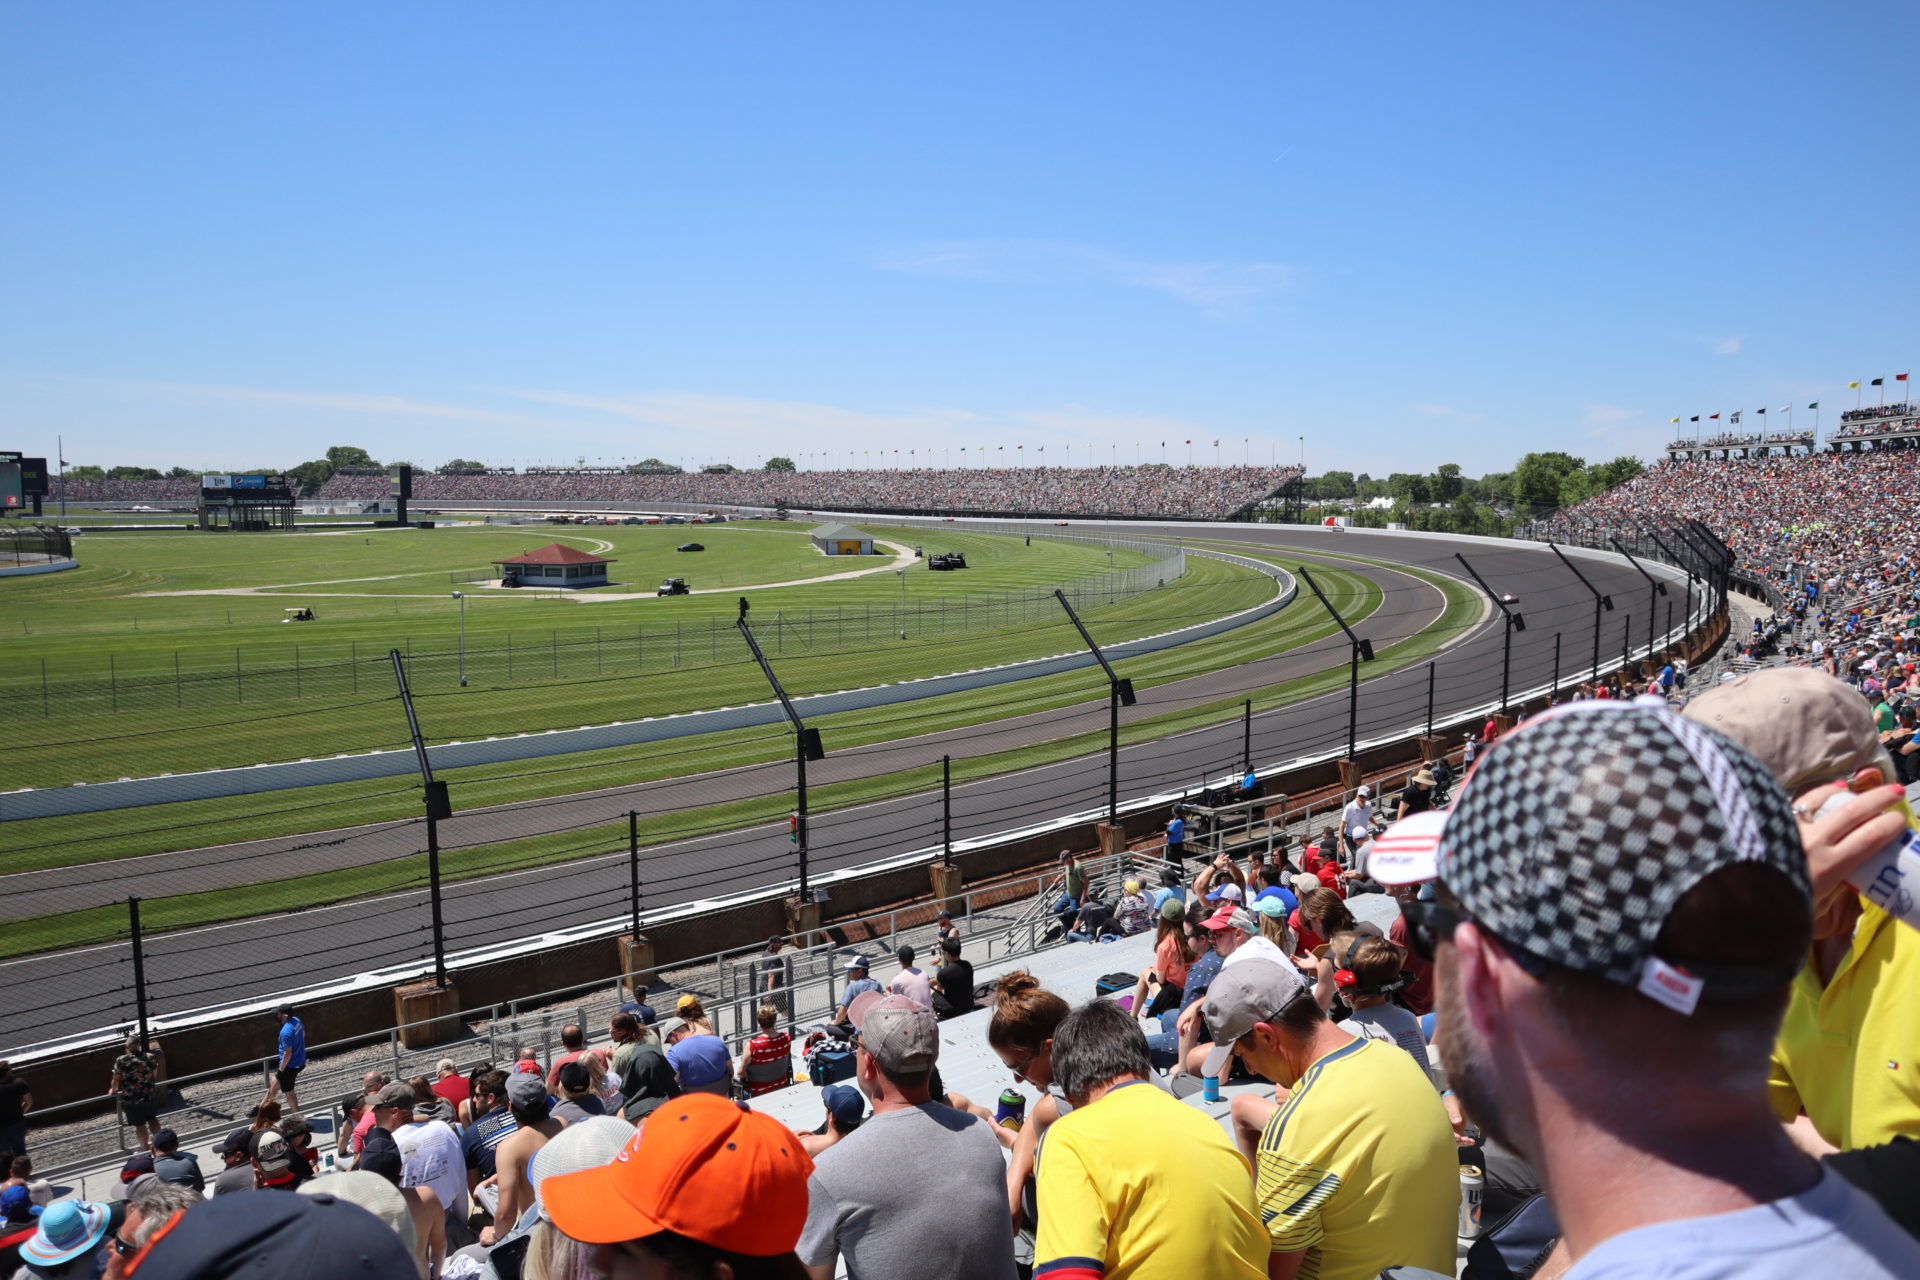 Indy 500 Tailgating: An Inside Look at the Indianapolis 500 Tailgating Scene 7